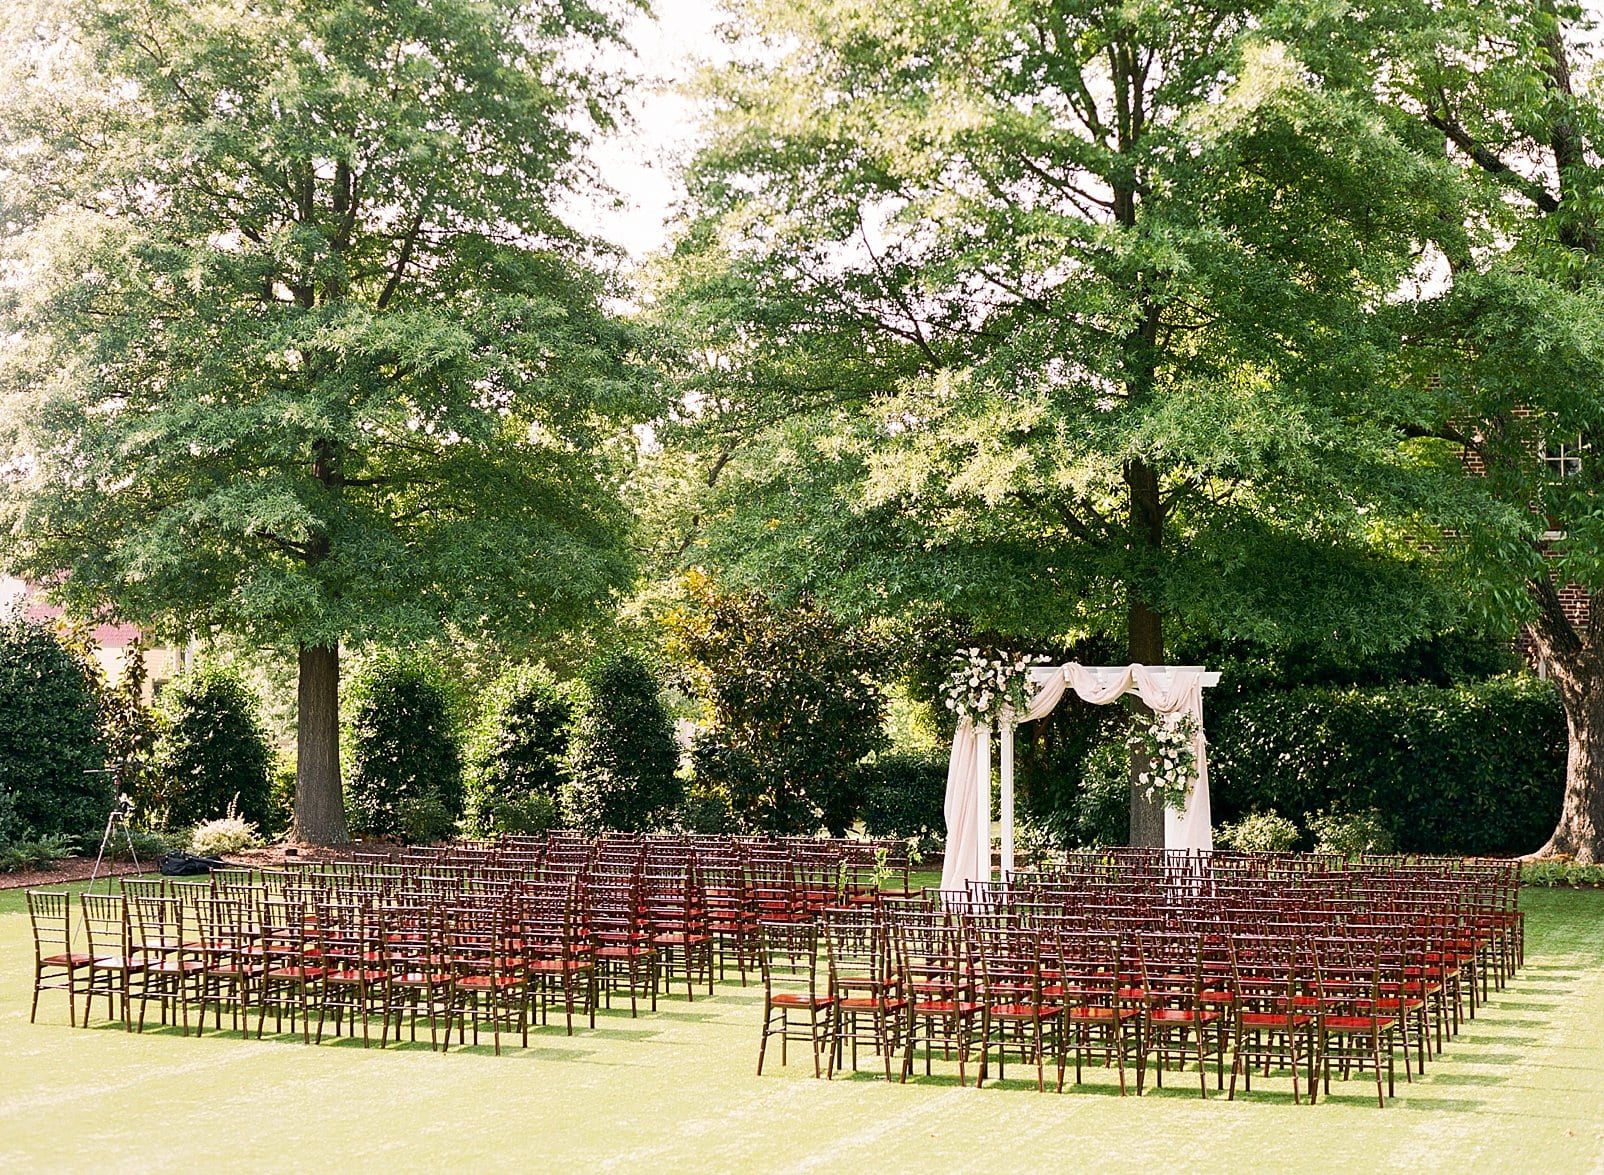 Merrimon Wynne wedding ceremony site with brown wooden chairs and a white arbor draped with cloth and decorated with flower installations photo